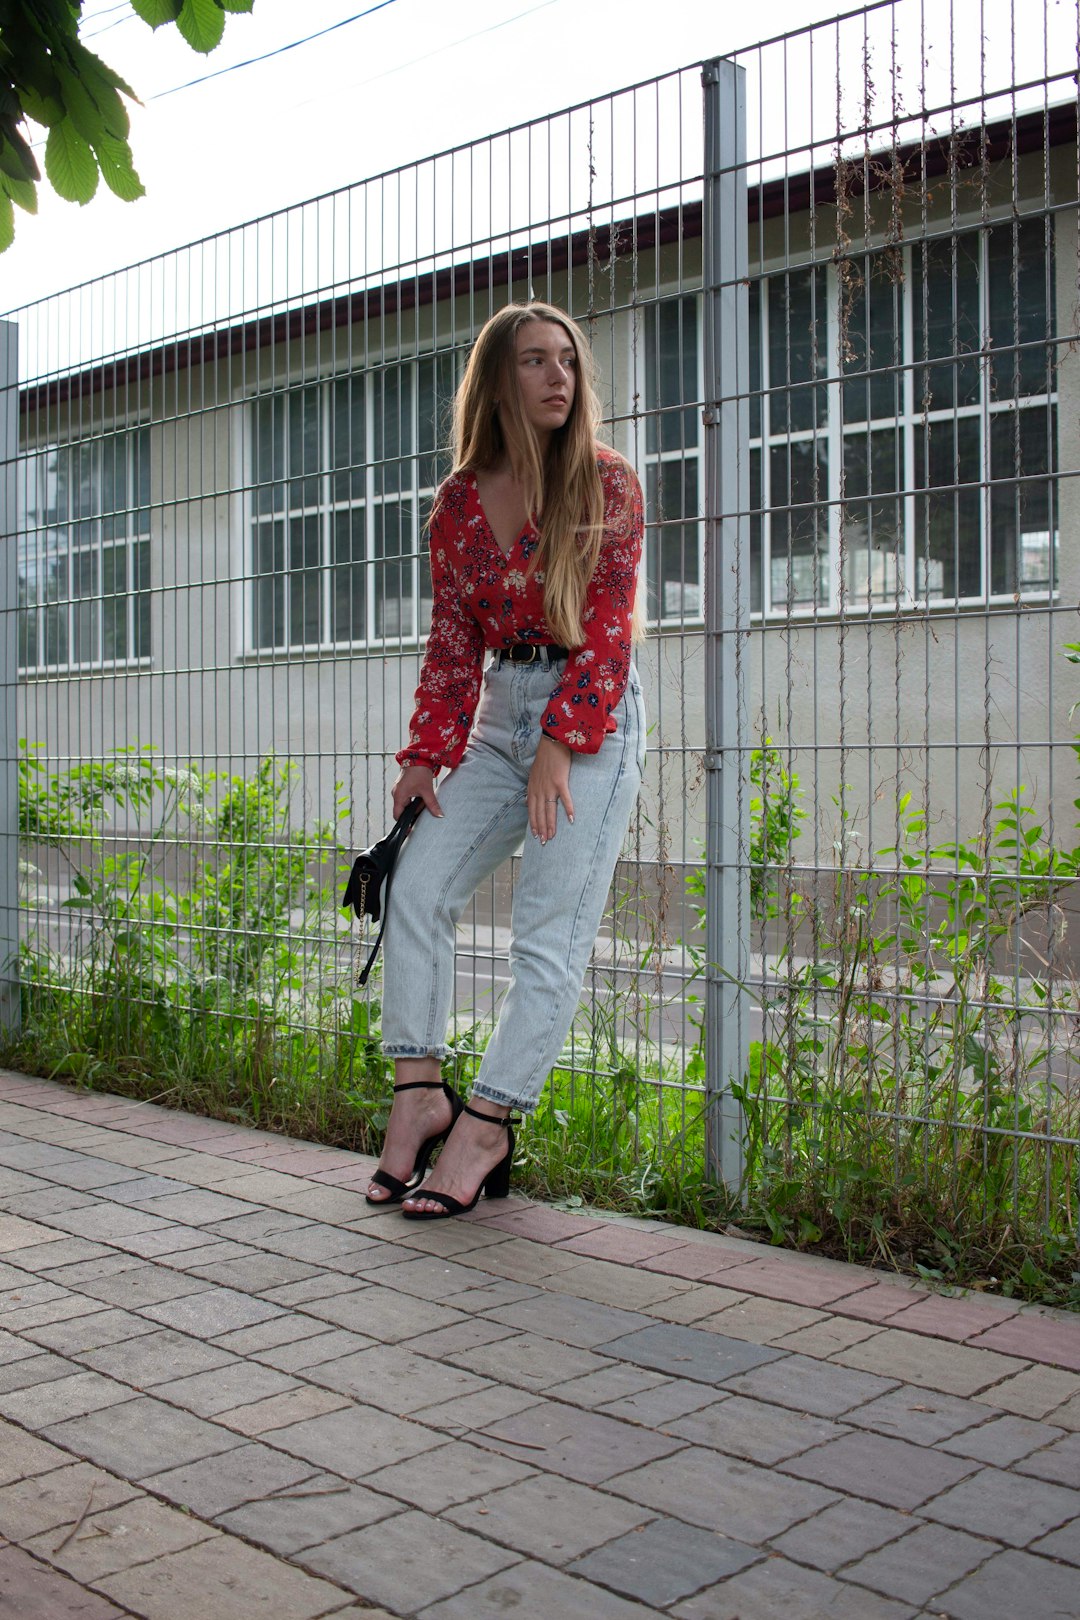 woman in red floral long sleeve shirt and white pants standing on gray concrete floor during